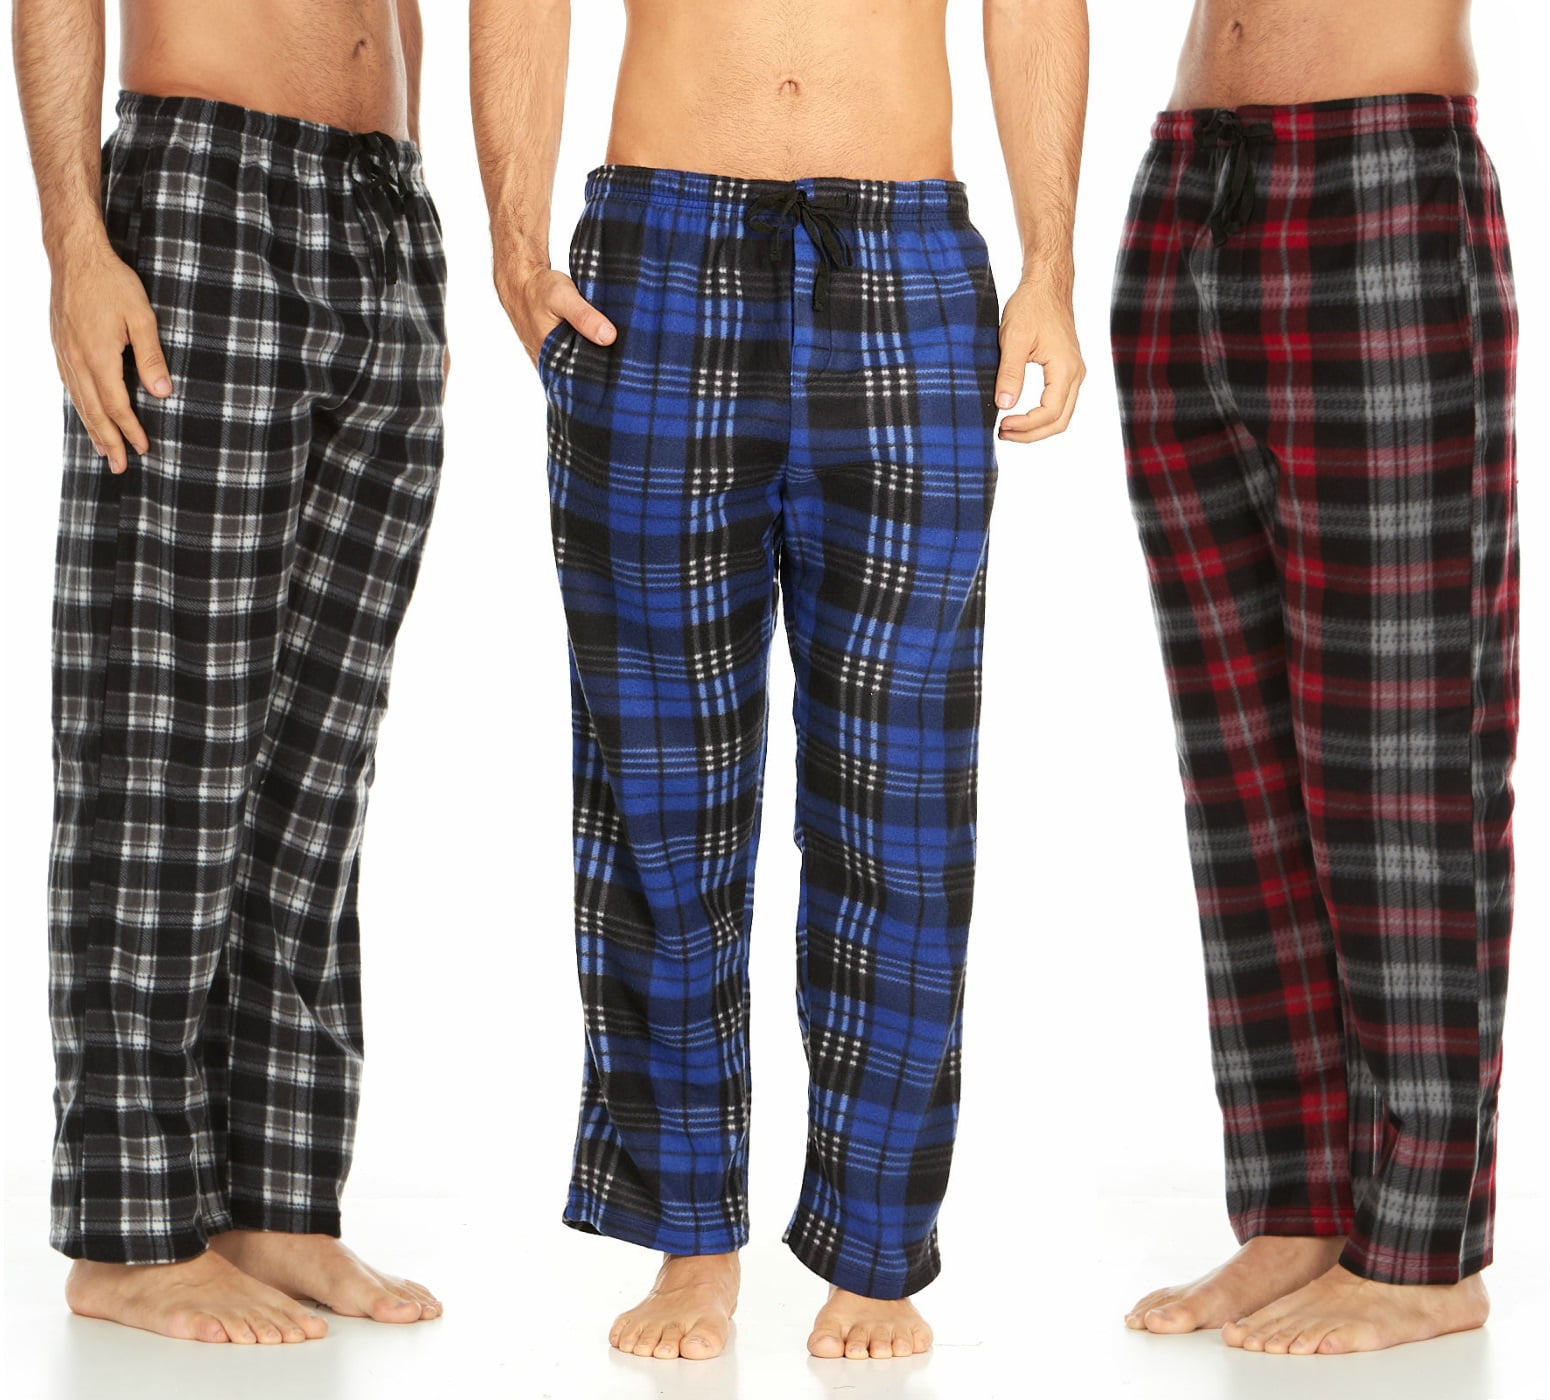 3 Pack:Womens Cotton Super-Soft Flannel Plaid Pajama//Lounge Pants with Pockets